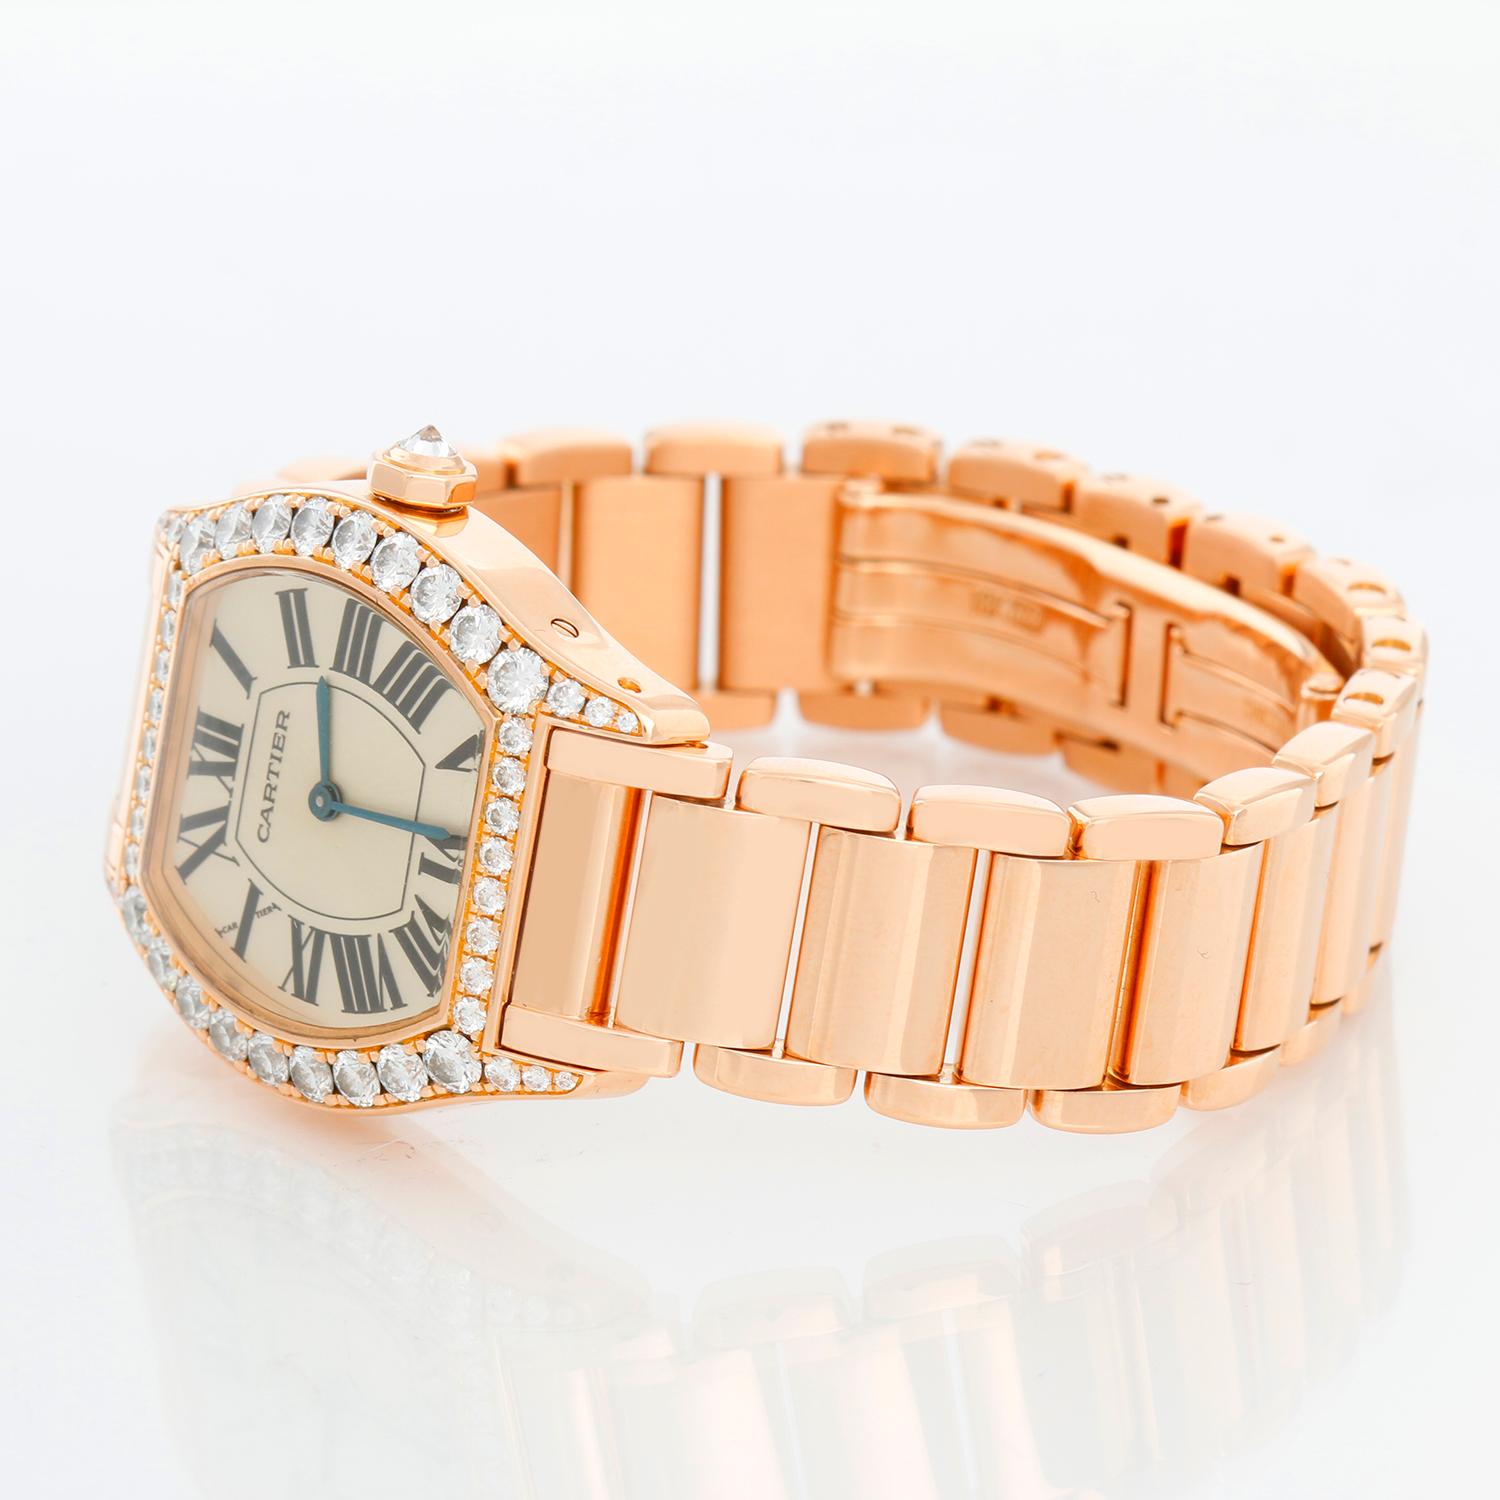 Cartier Tortue Ladies Rose Gold Diamond Watch Ref 2645 - Manual winding. Rose Gold case with diamonds ( 20 mm x 27mm). Silver dial with Roman numerals. 18K Rose Gold bracelet; will fit up to a 6 1/2 inch wrist . Pre-owned with Cartier box and books. 